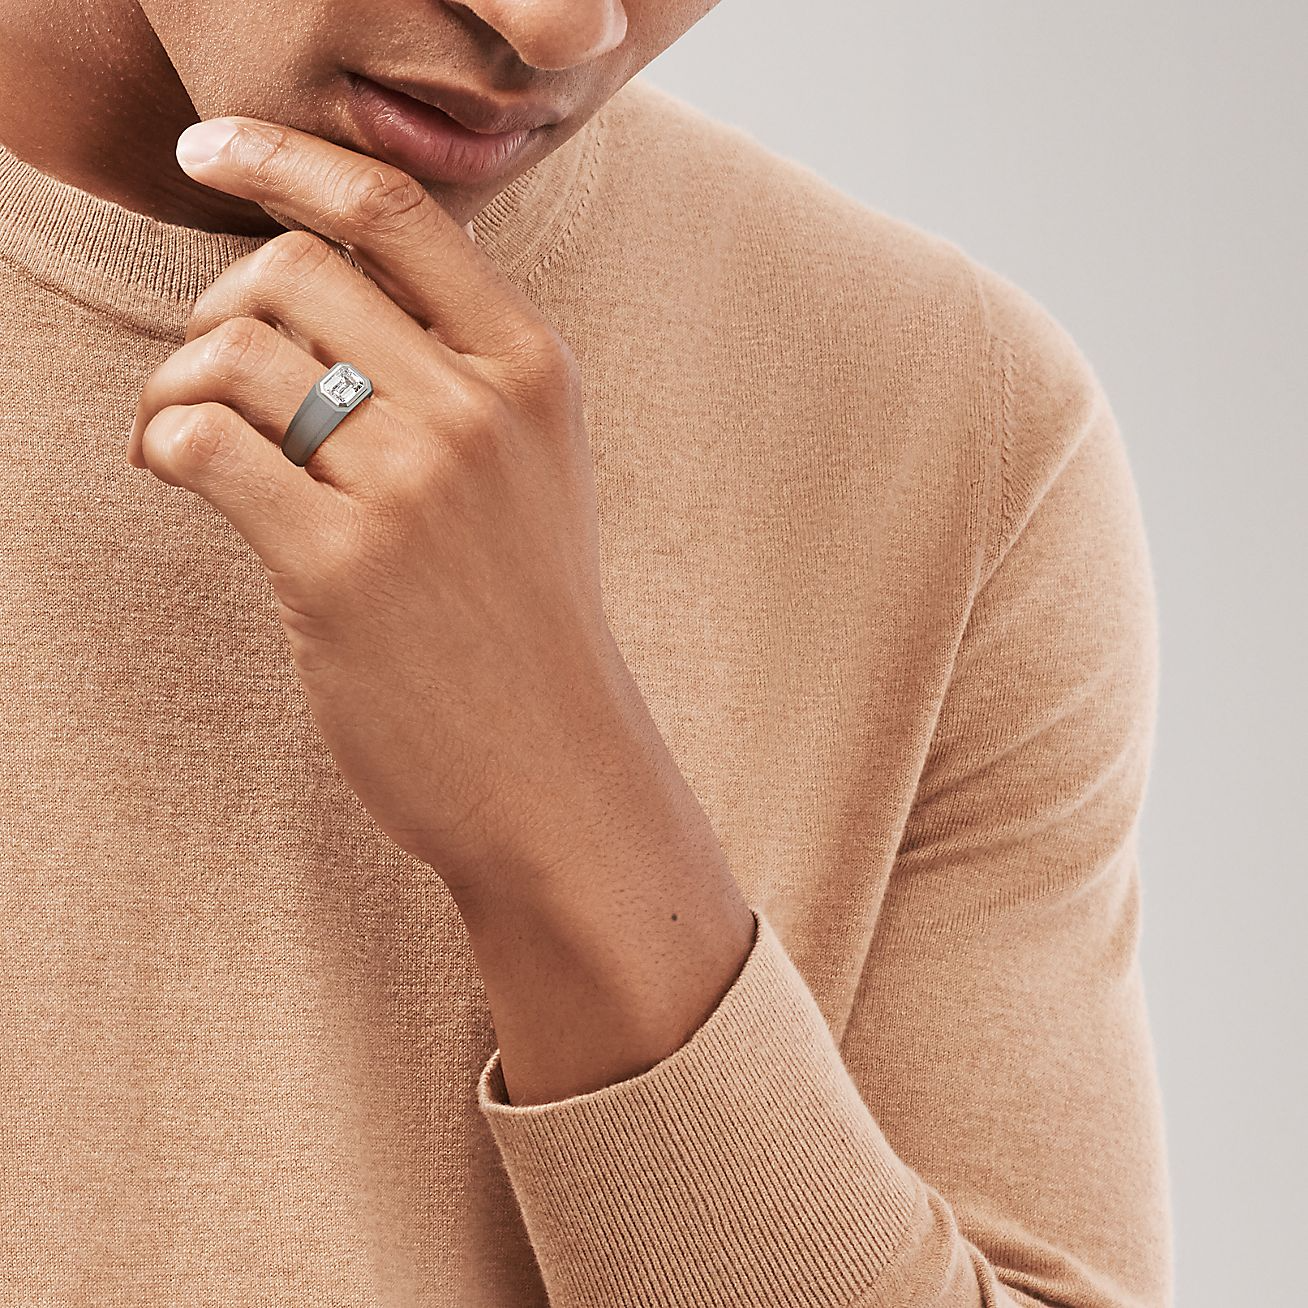 Tiffany & Co Introduces its First Men's Engagement Ring